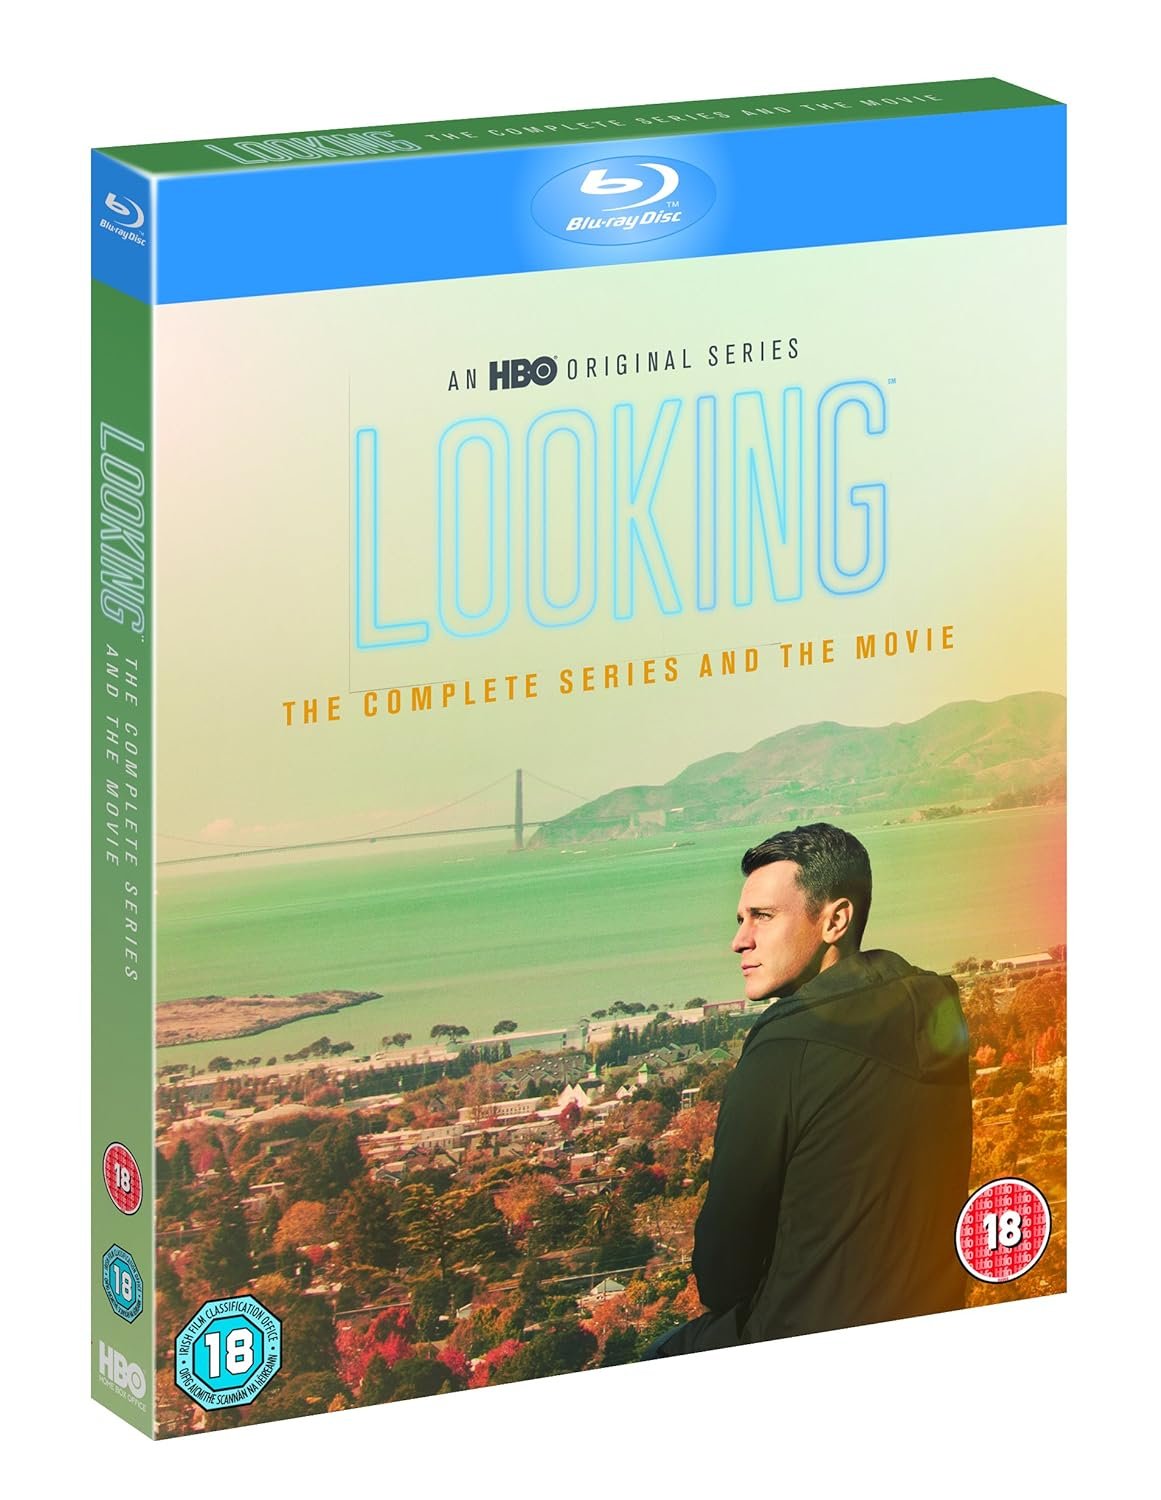 Looking: The Complete Series and the Movie